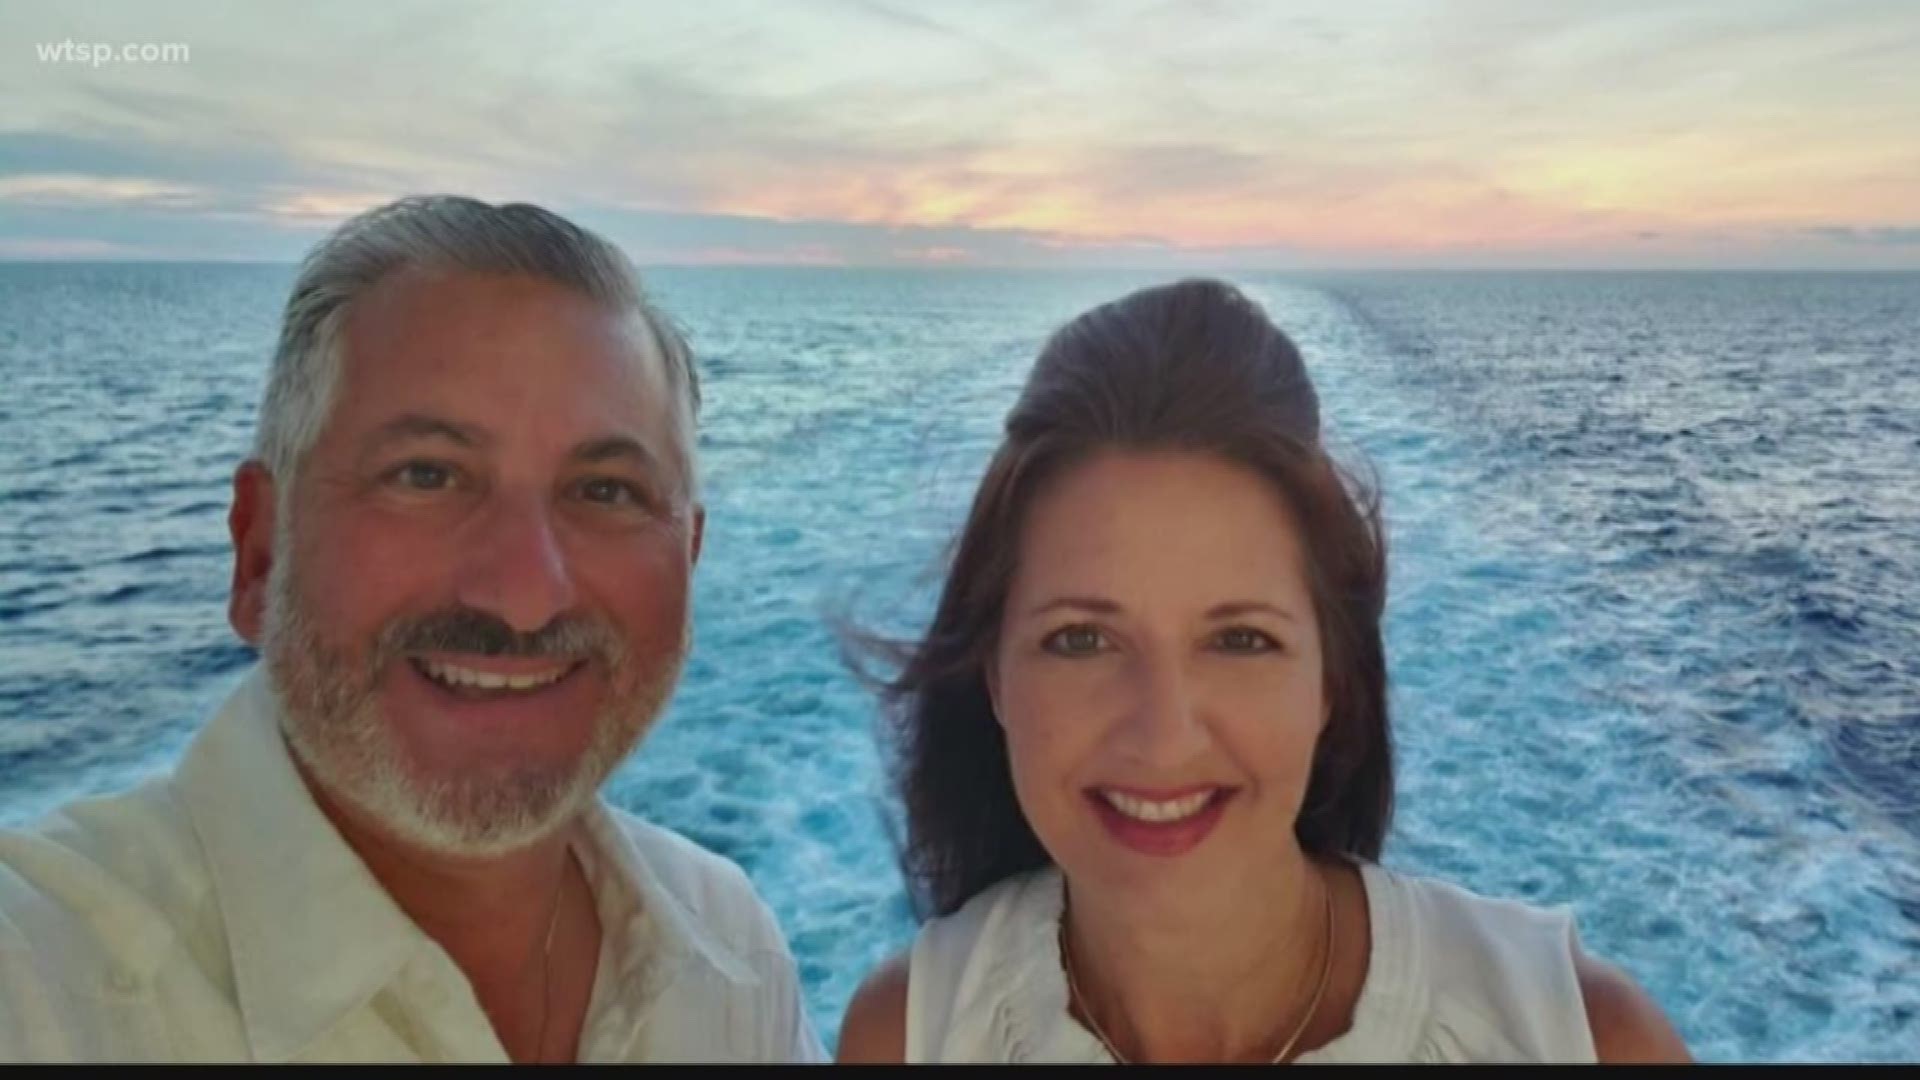 St. Petersburg Mayor Rick Kriseman and his family were on their way to Cuba when an order from the Trump administration threw off their plans.

Kriseman was on a Norwegian Cruise Line vessel bound for Havana that stopped first in Key West before getting diverted to the Bahamas.

He and his wife were taking in the sunset on the back of the ship when word came down about their drastic change in itinerary.